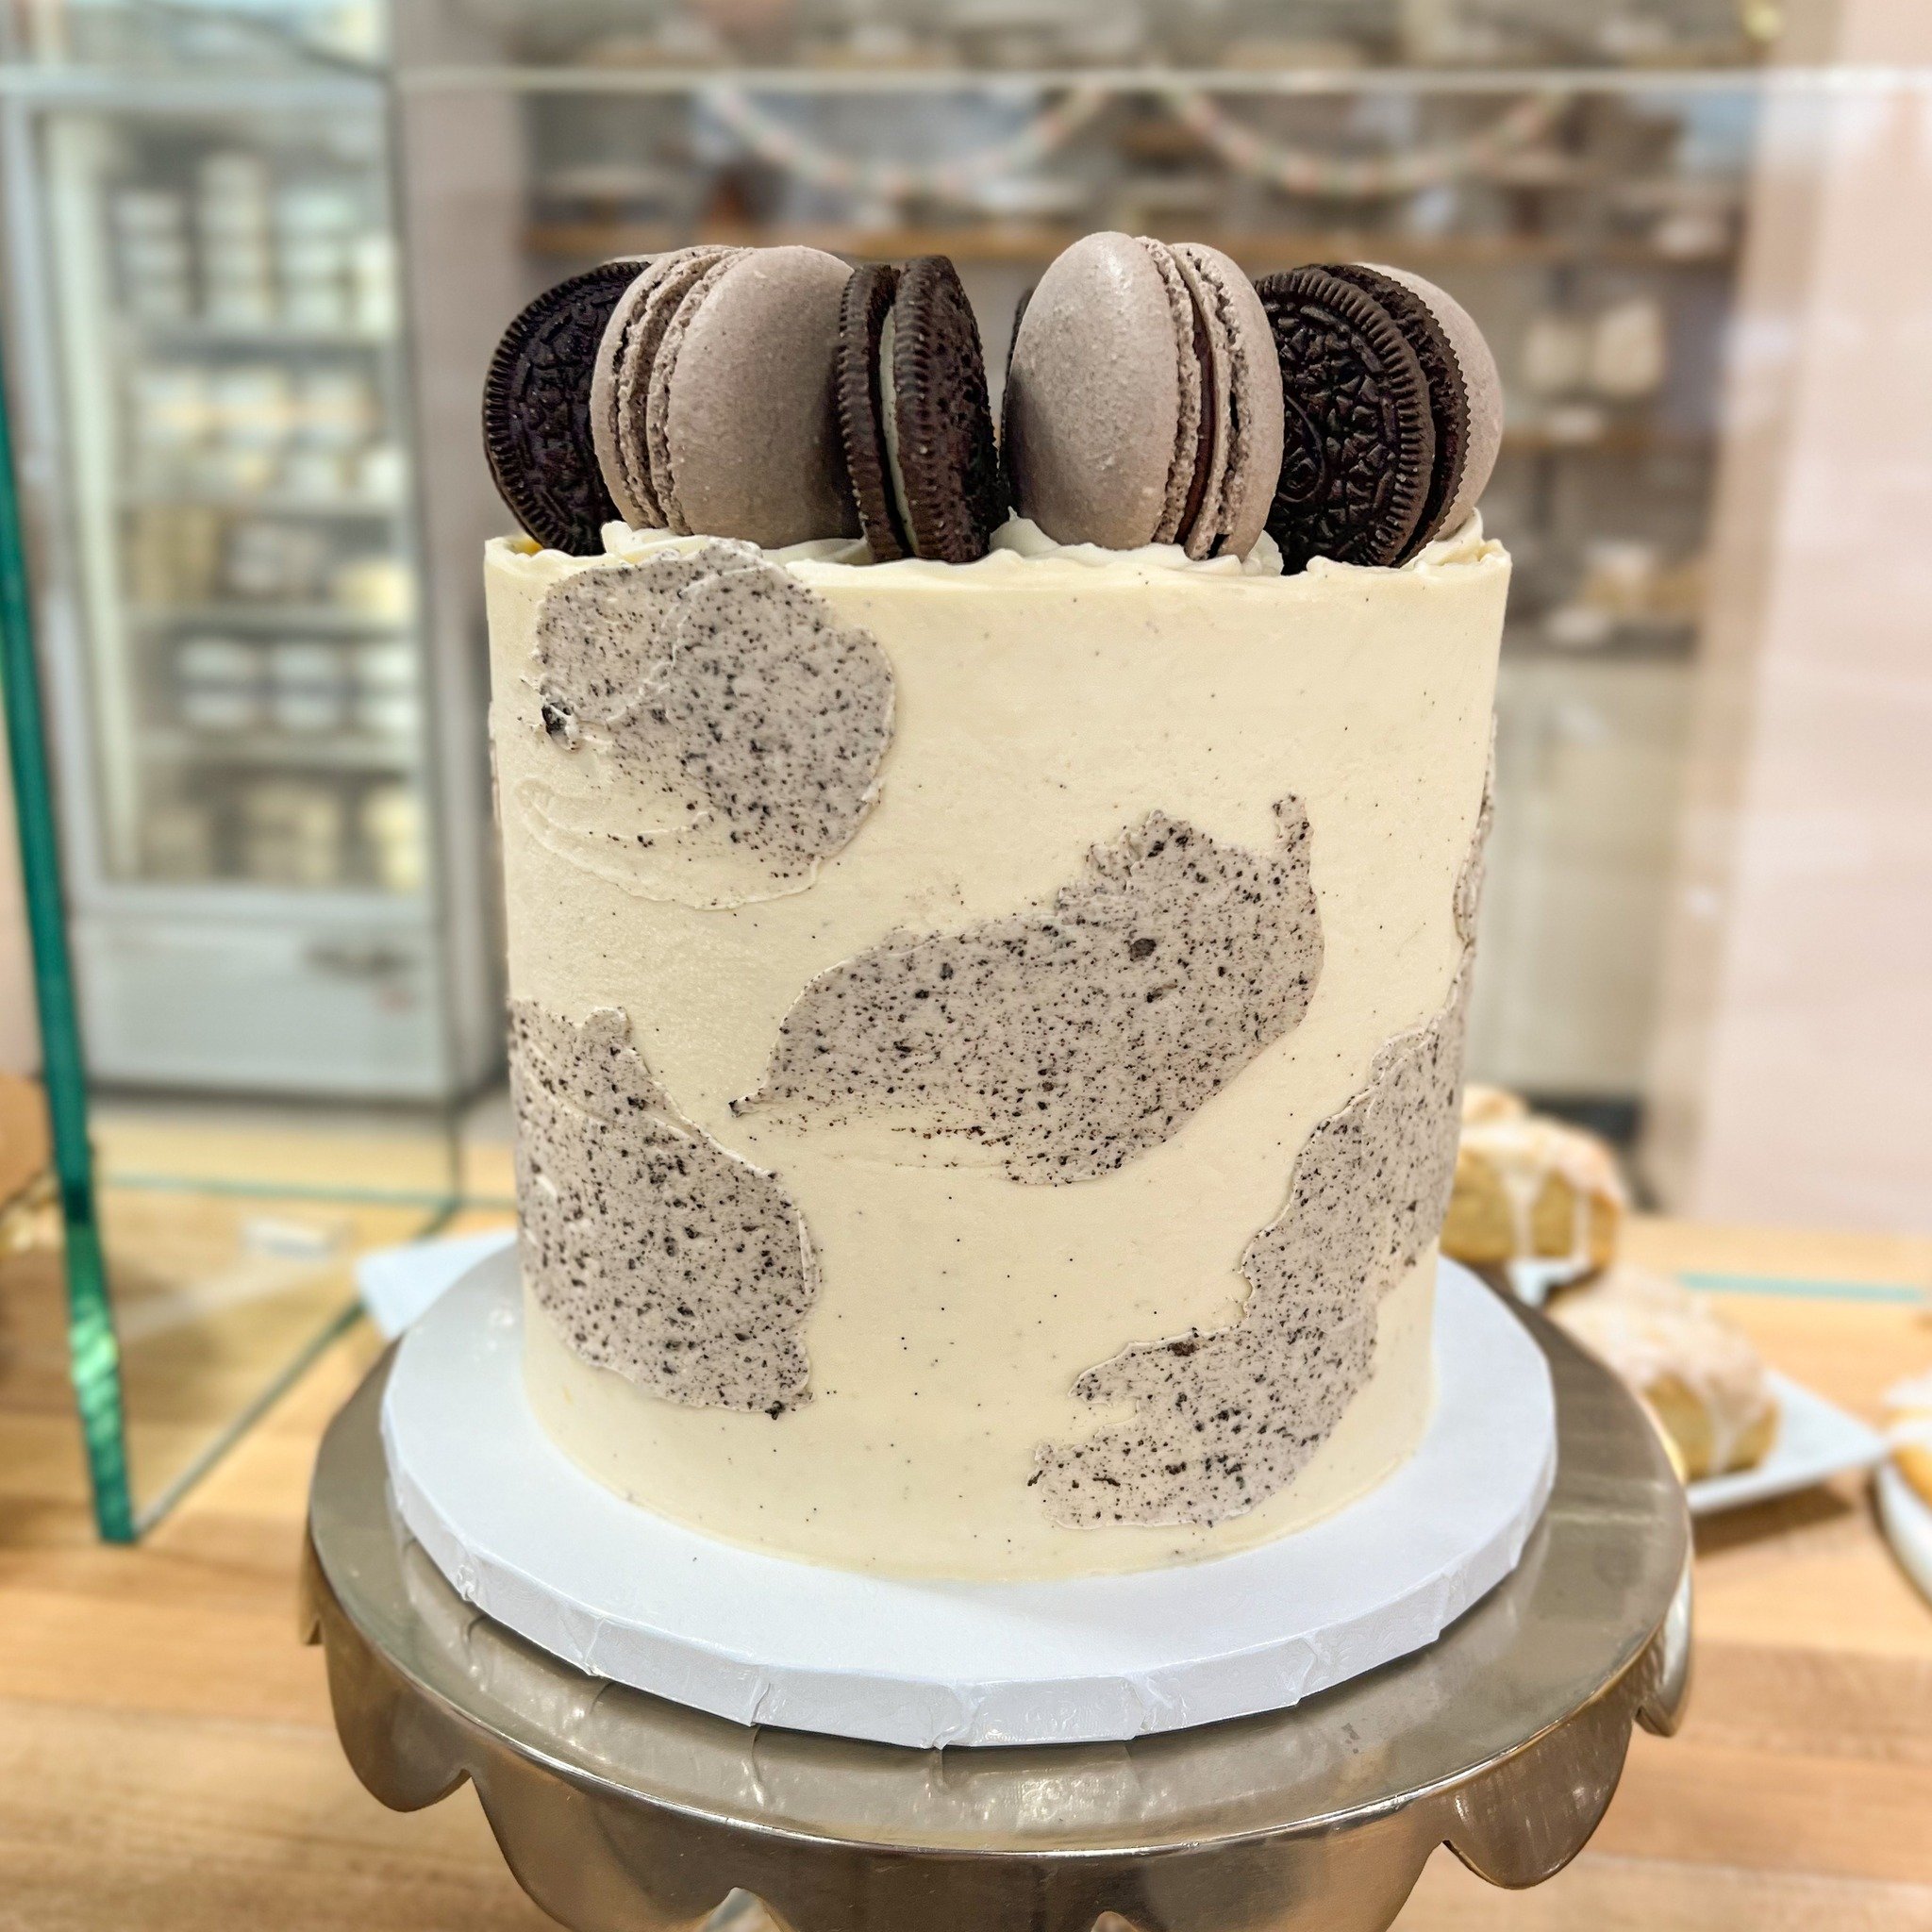 We hope you had a great Mother's Day weekend! Don't forget, Mondays &amp; Tuesdays are DOUBLE POINT days!
.
Here's the menu for Monday, May 13th.
.
Scones:
Lemon Poppy
.
Cookies:
Chocolate Chip
Not My Cookie
.
Special cookies this month:
Orange Bloss